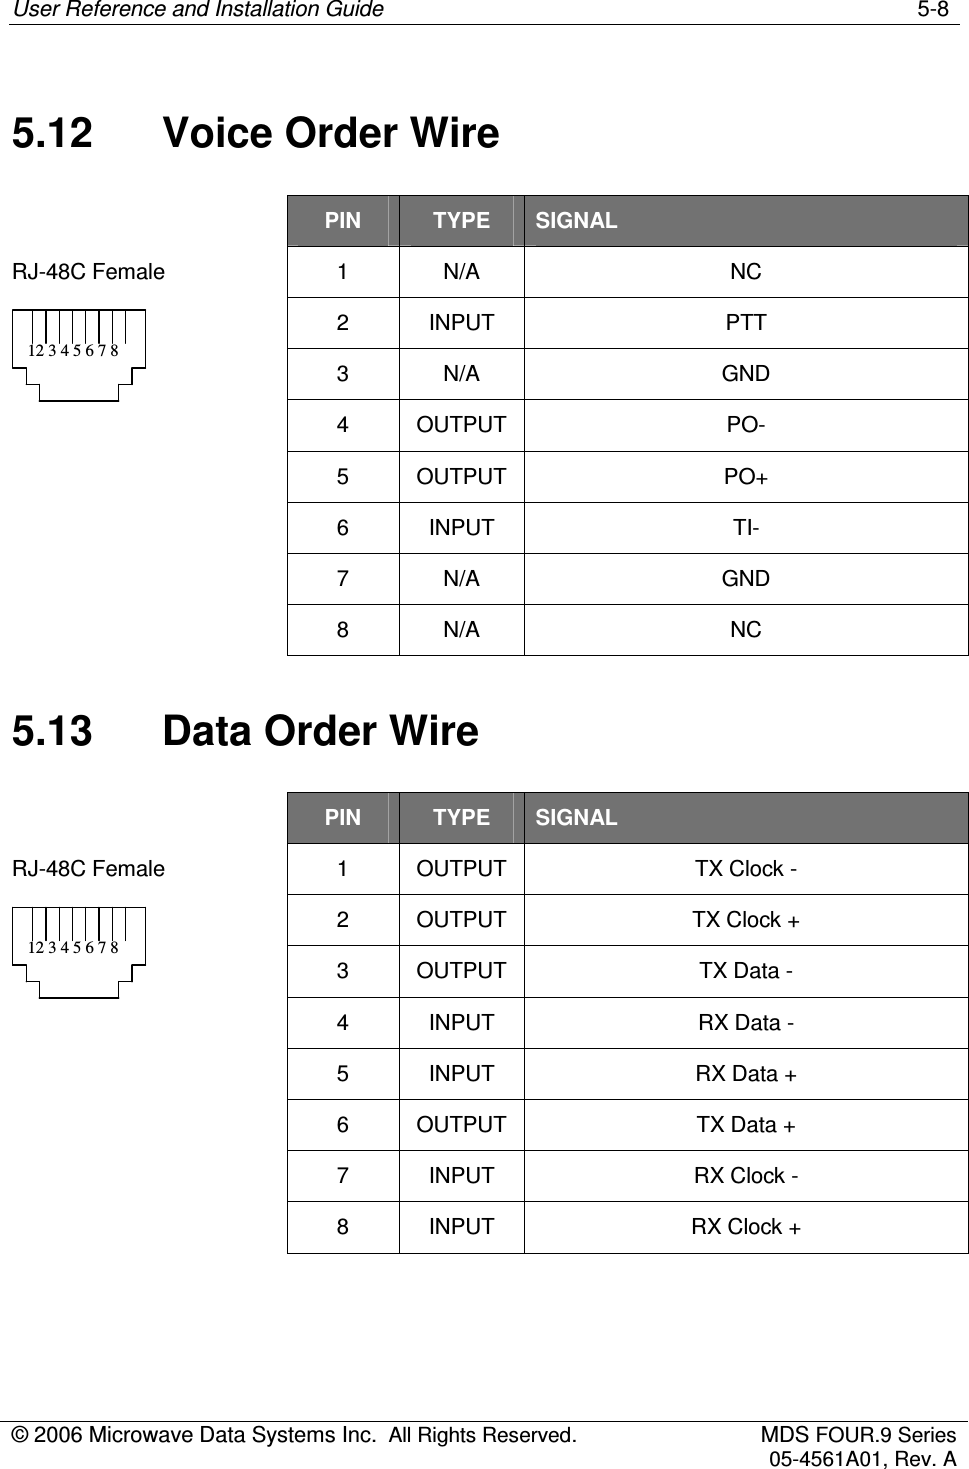 User Reference and Installation Guide    5-8 © 2006 Microwave Data Systems Inc.  All Rights Reserved.  MDS FOUR.9 Series 05-4561A01, Rev. A  5.12  Voice Order Wire   PIN  TYPE  SIGNAL 1  N/A  NC 2  INPUT  PTT 3  N/A  GND 4  OUTPUT  PO- RJ-48C Female  12 3 4 5 6 7 8  5  OUTPUT  PO+   6  INPUT  TI-   7  N/A  GND   8  N/A  NC 5.13  Data Order Wire   PIN  TYPE  SIGNAL 1  OUTPUT  TX Clock - 2  OUTPUT  TX Clock + 3  OUTPUT  TX Data - 4  INPUT  RX Data - RJ-48C Female  12 3 4 5 6 7 8  5  INPUT  RX Data +   6  OUTPUT  TX Data +   7  INPUT  RX Clock -   8  INPUT  RX Clock + 